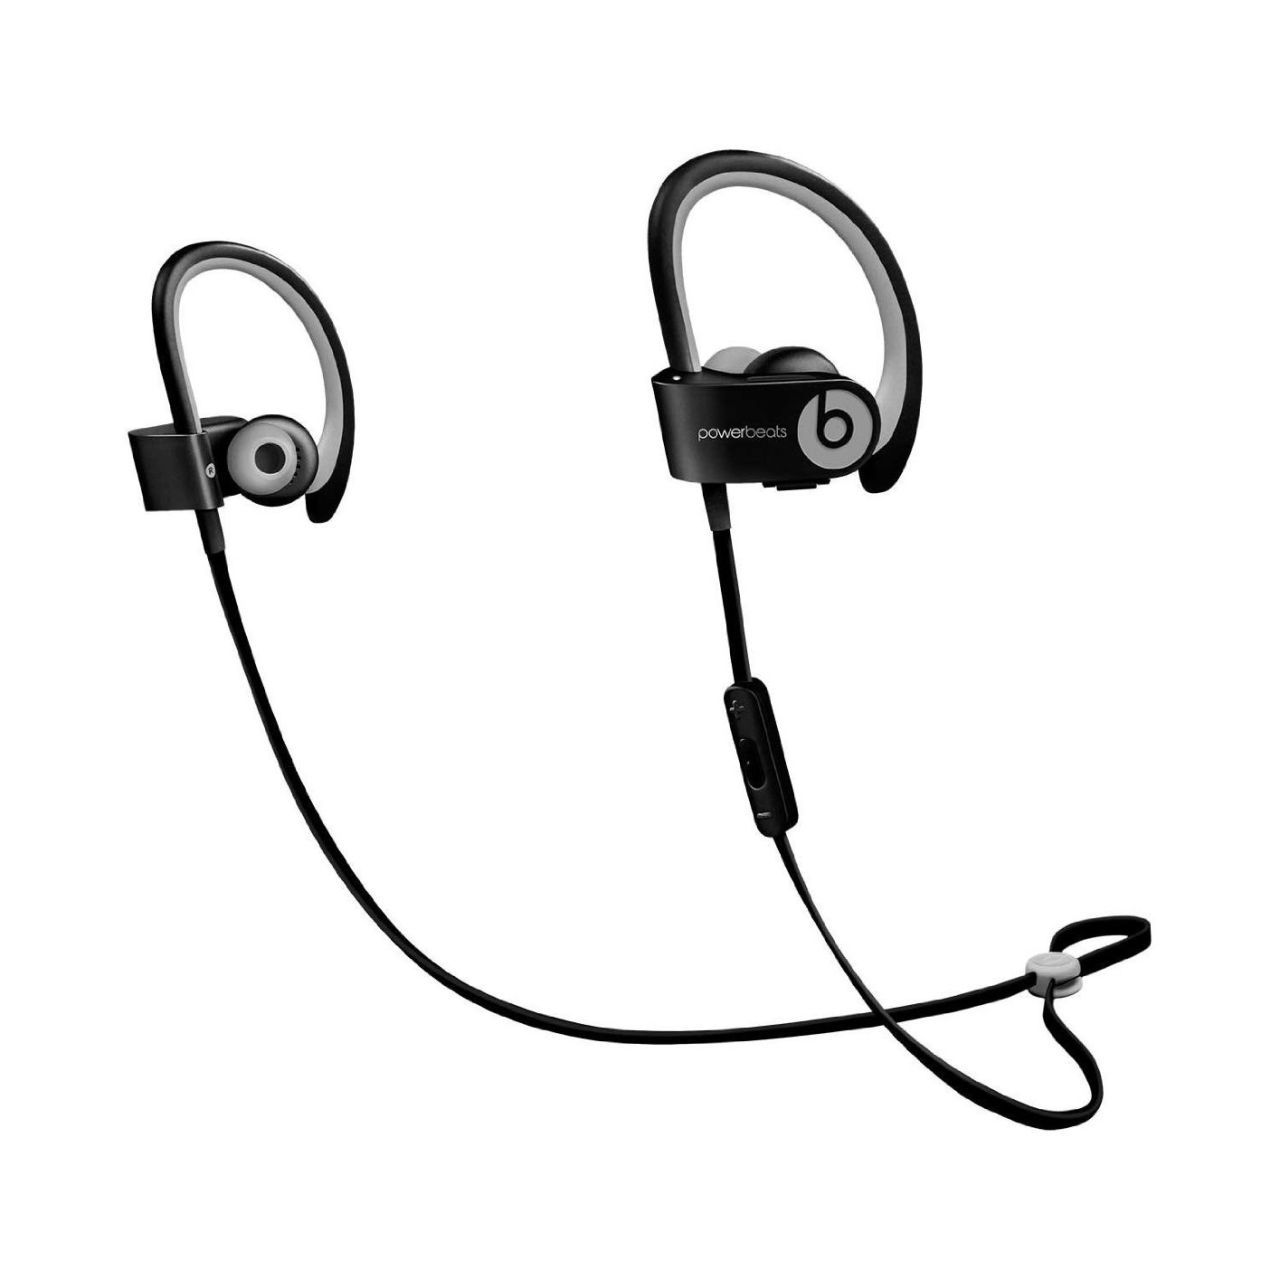 Beats PowerBeats2 Wireless Headphones Review, Price and Features